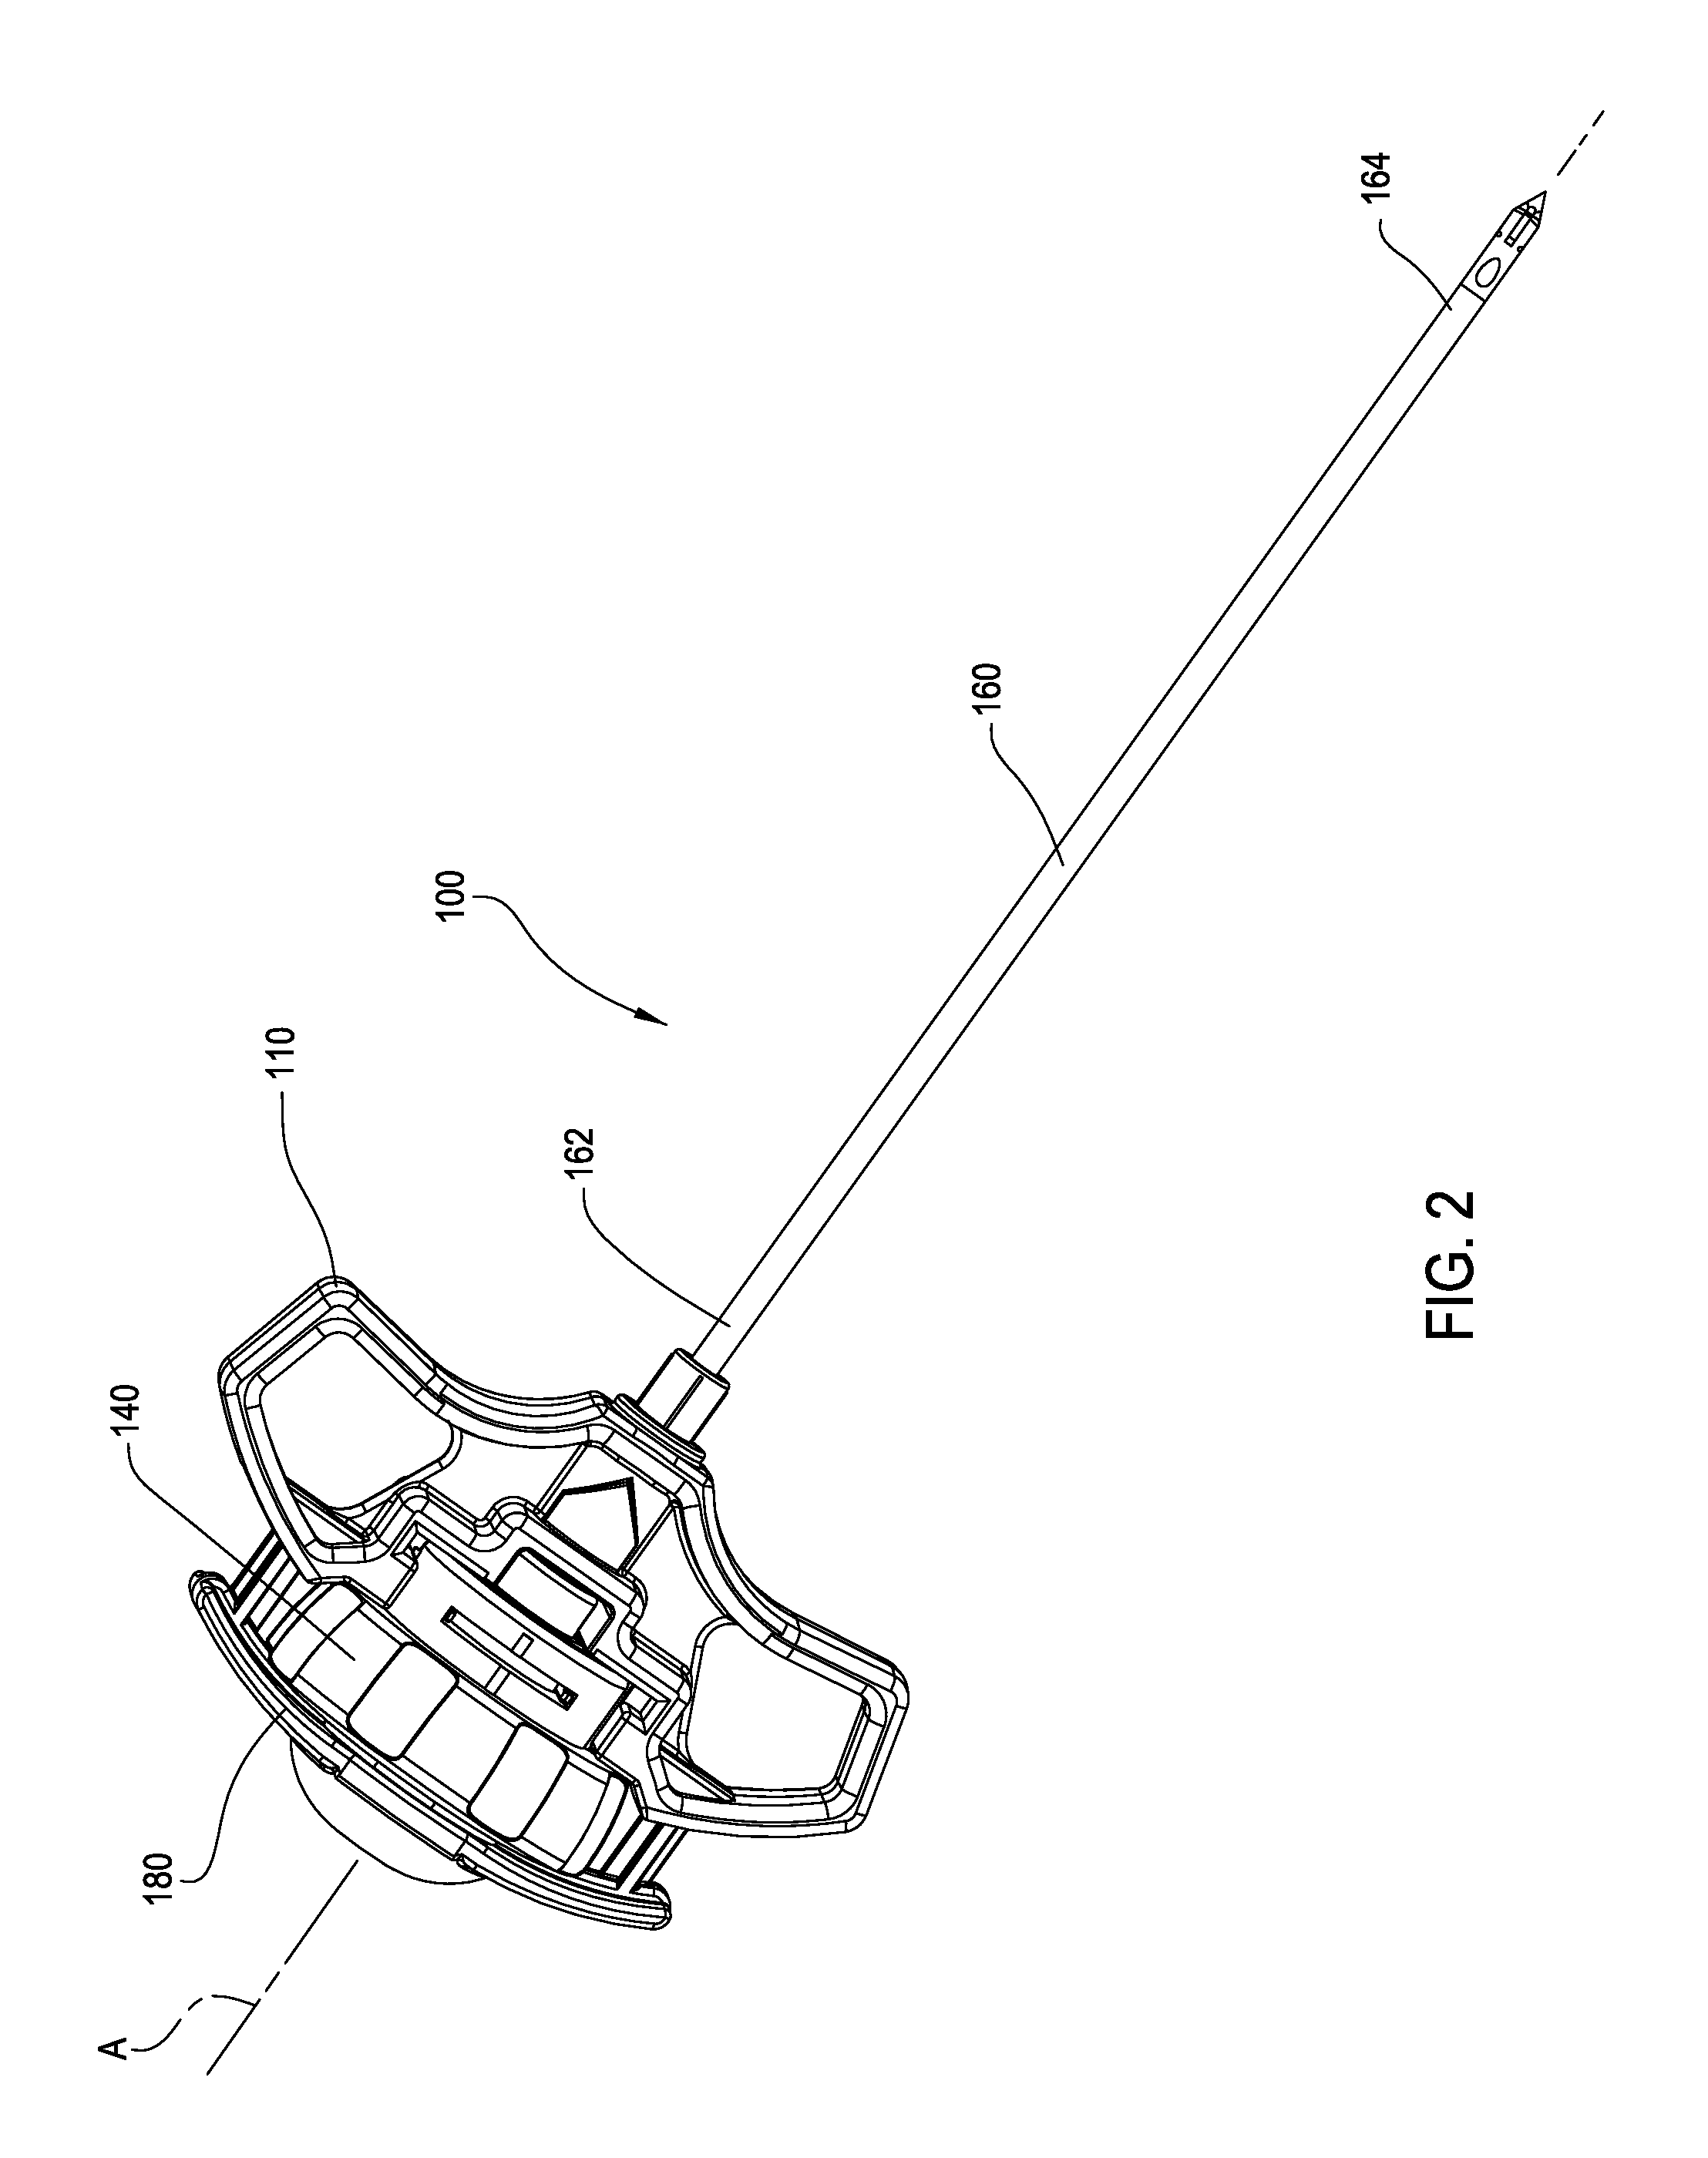 Cavity creator with integral cement delivery lumen